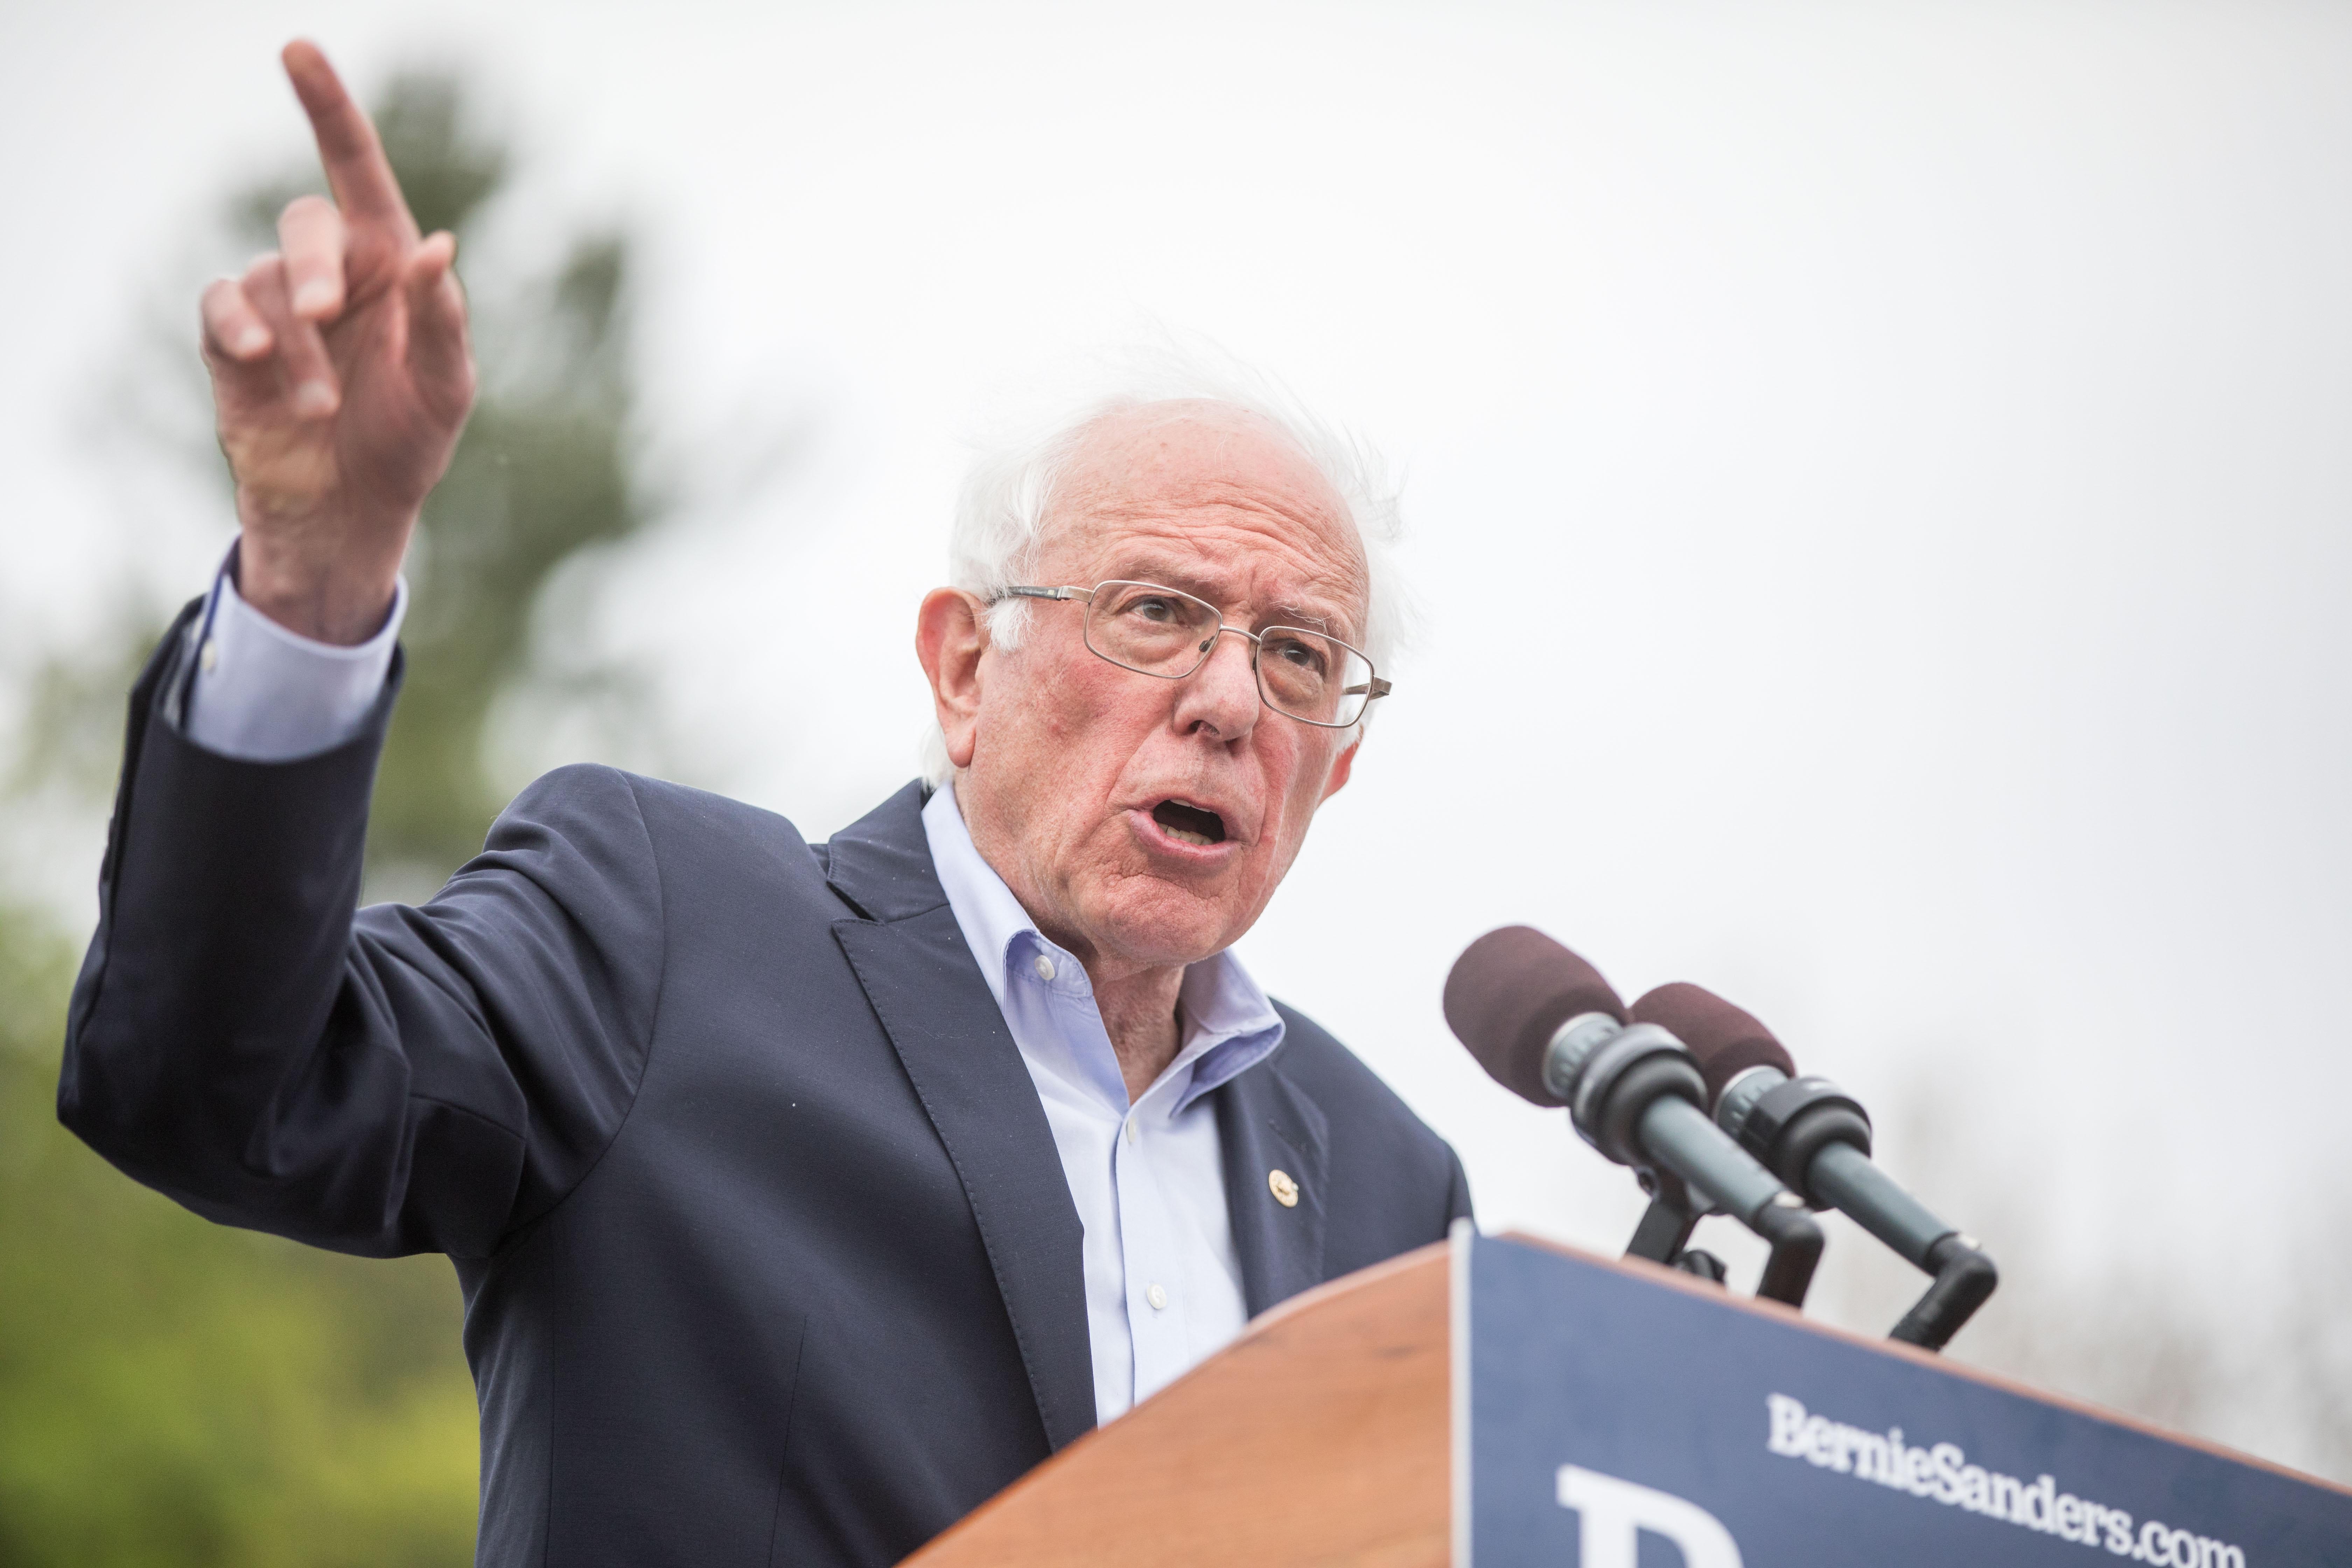 MONTPELIER, VT - MAY 25:  Democratic presidential candidate Sen. Bernie Sanders speaks during a rally in the capital of his home state of Vermont on May 25, 2019 in Montpelier, Vermont.  This was the first Vermont rally of Sanders' 2020 campaign. (Photo by Scott Eisen/Getty Images)